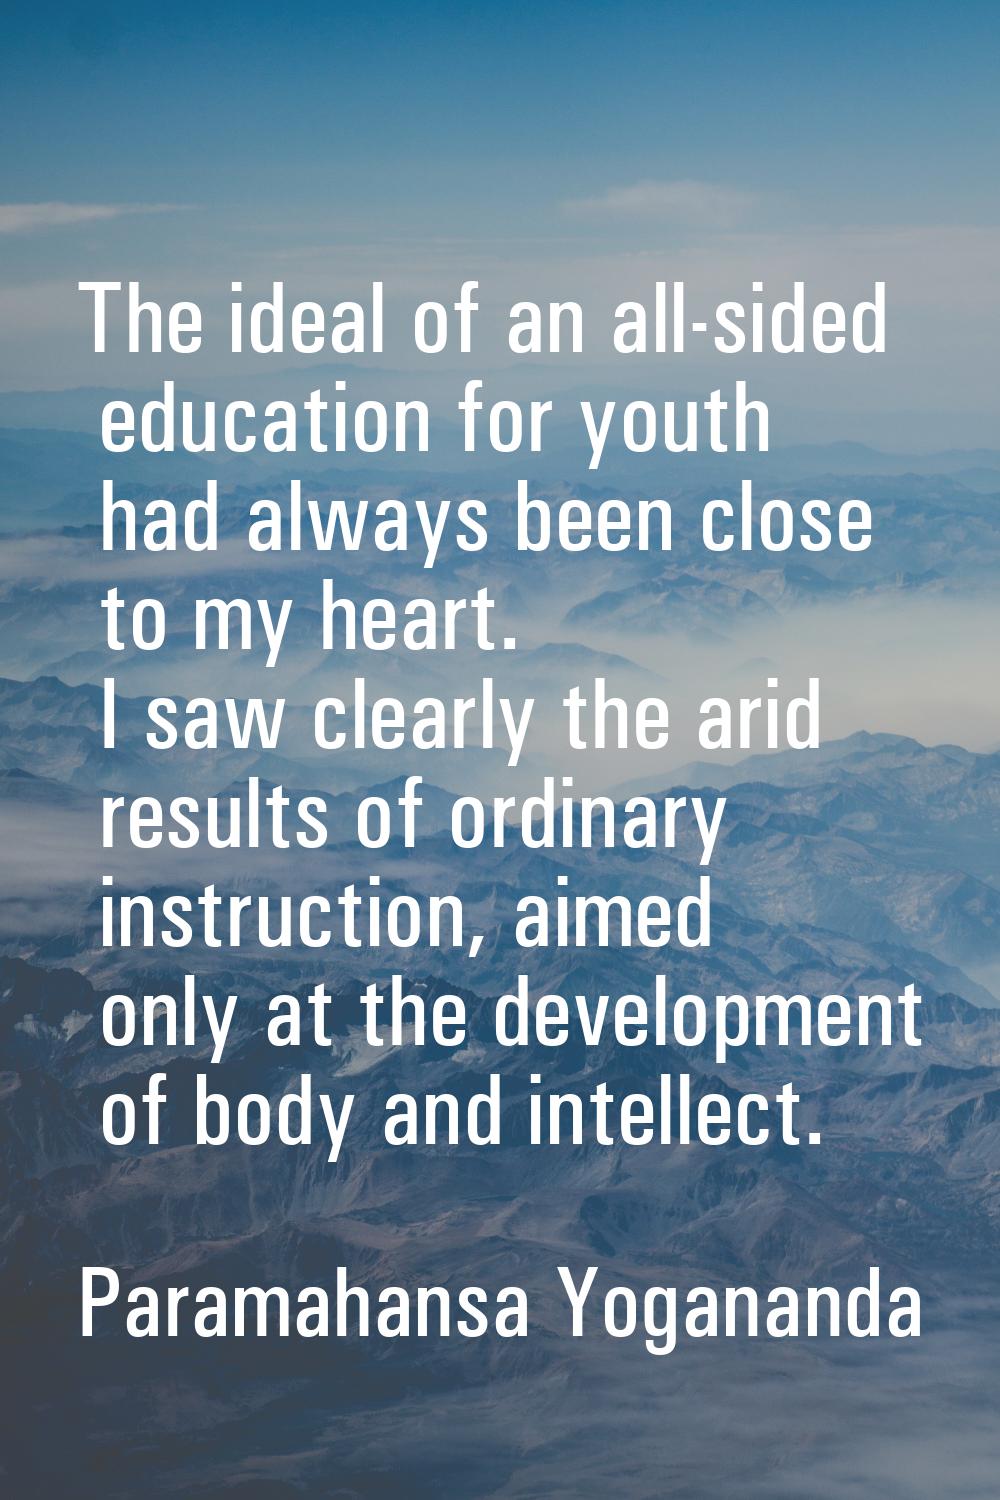 The ideal of an all-sided education for youth had always been close to my heart. I saw clearly the 